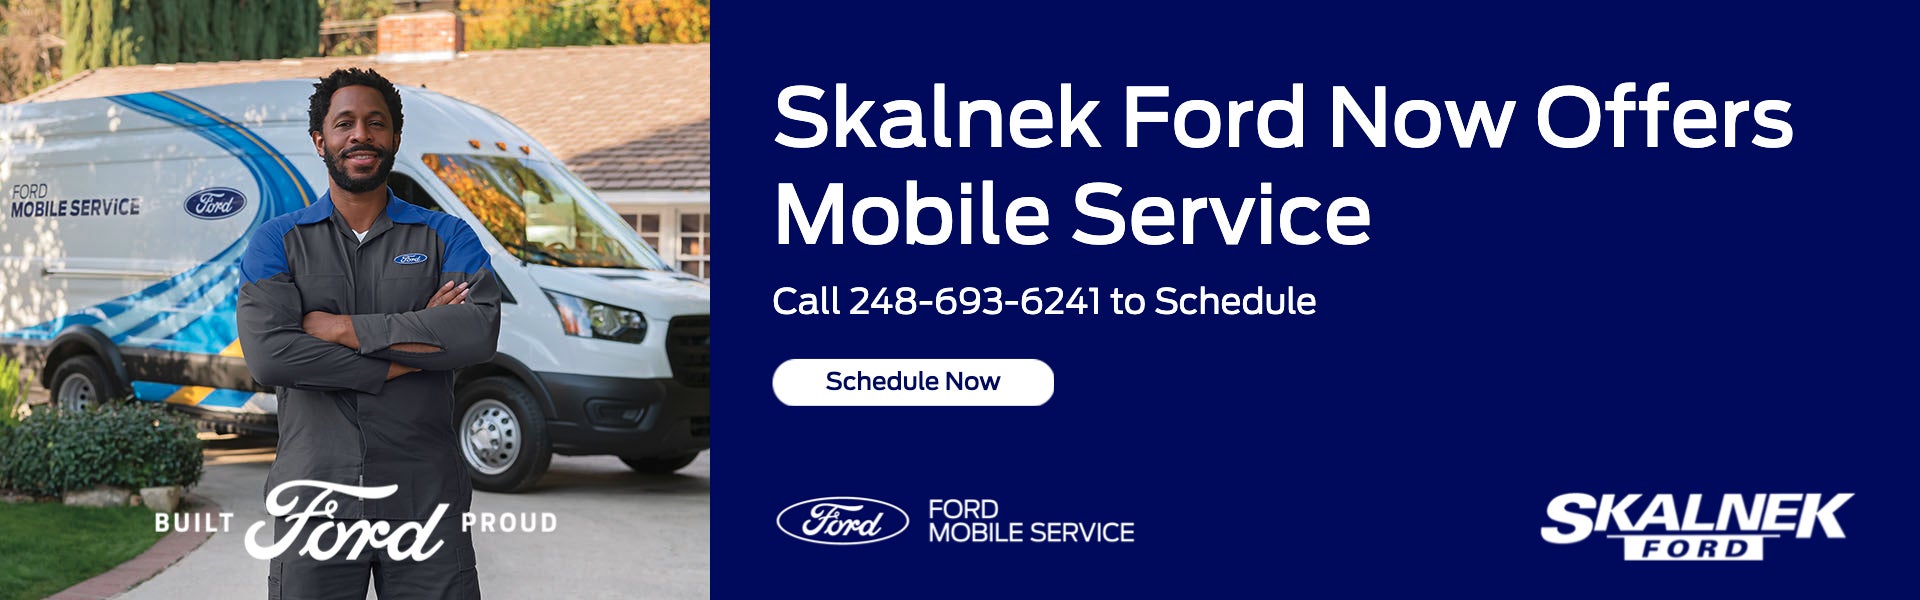 now offers mobile service